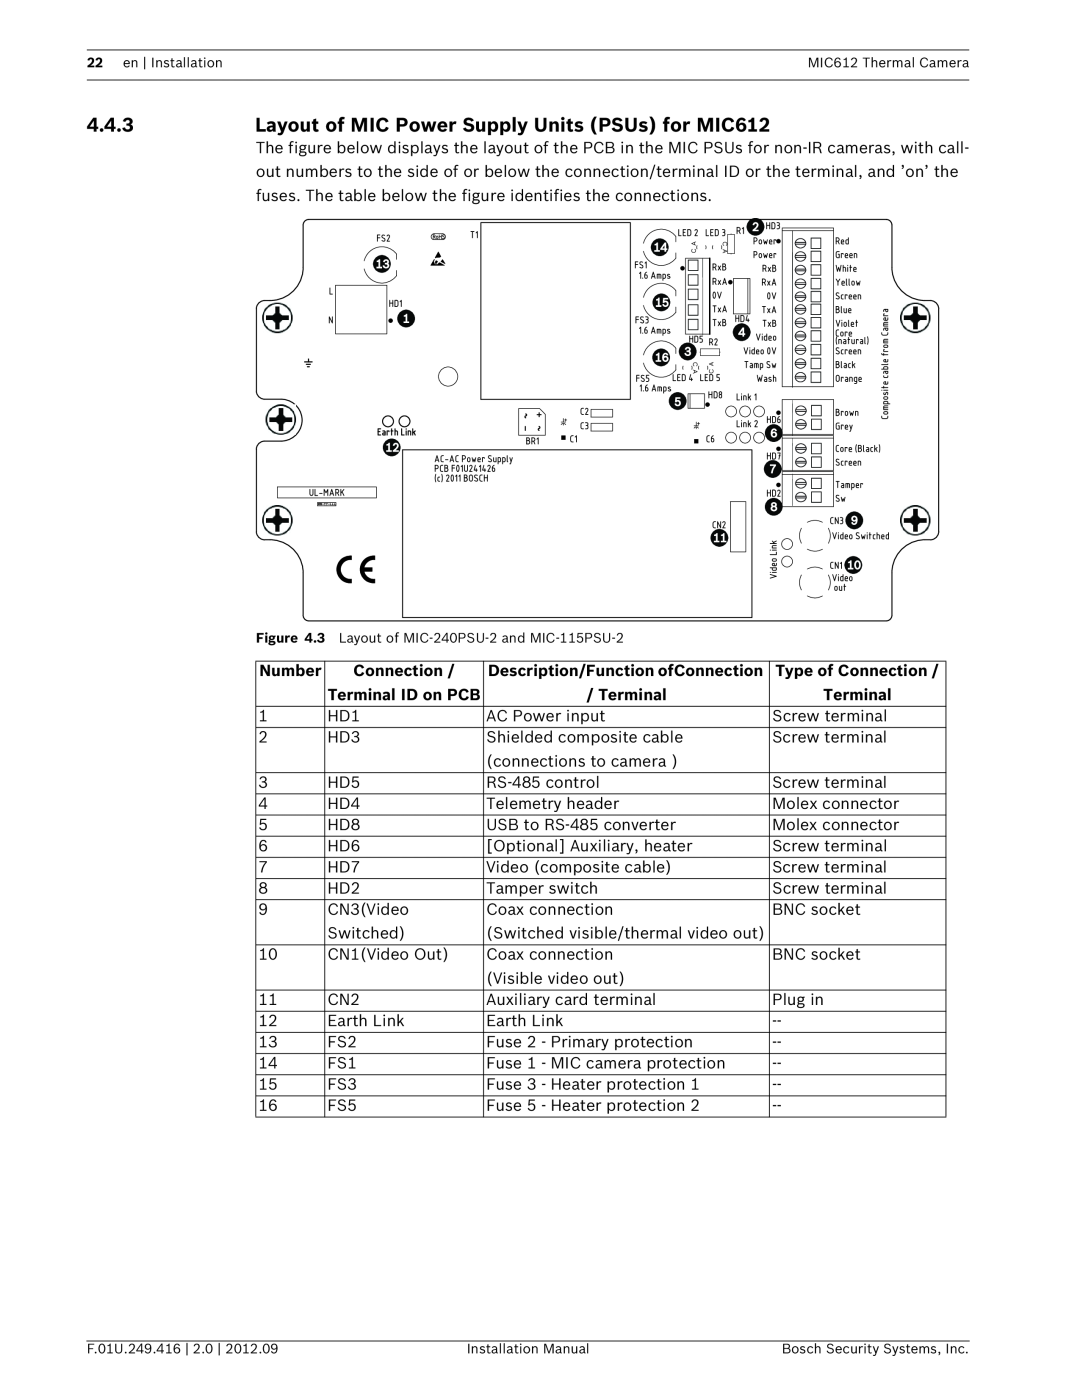 Bosch Appliances MIC612 Number, Description/Function ofConnection, Type of Connection, Terminal ID on PCB 